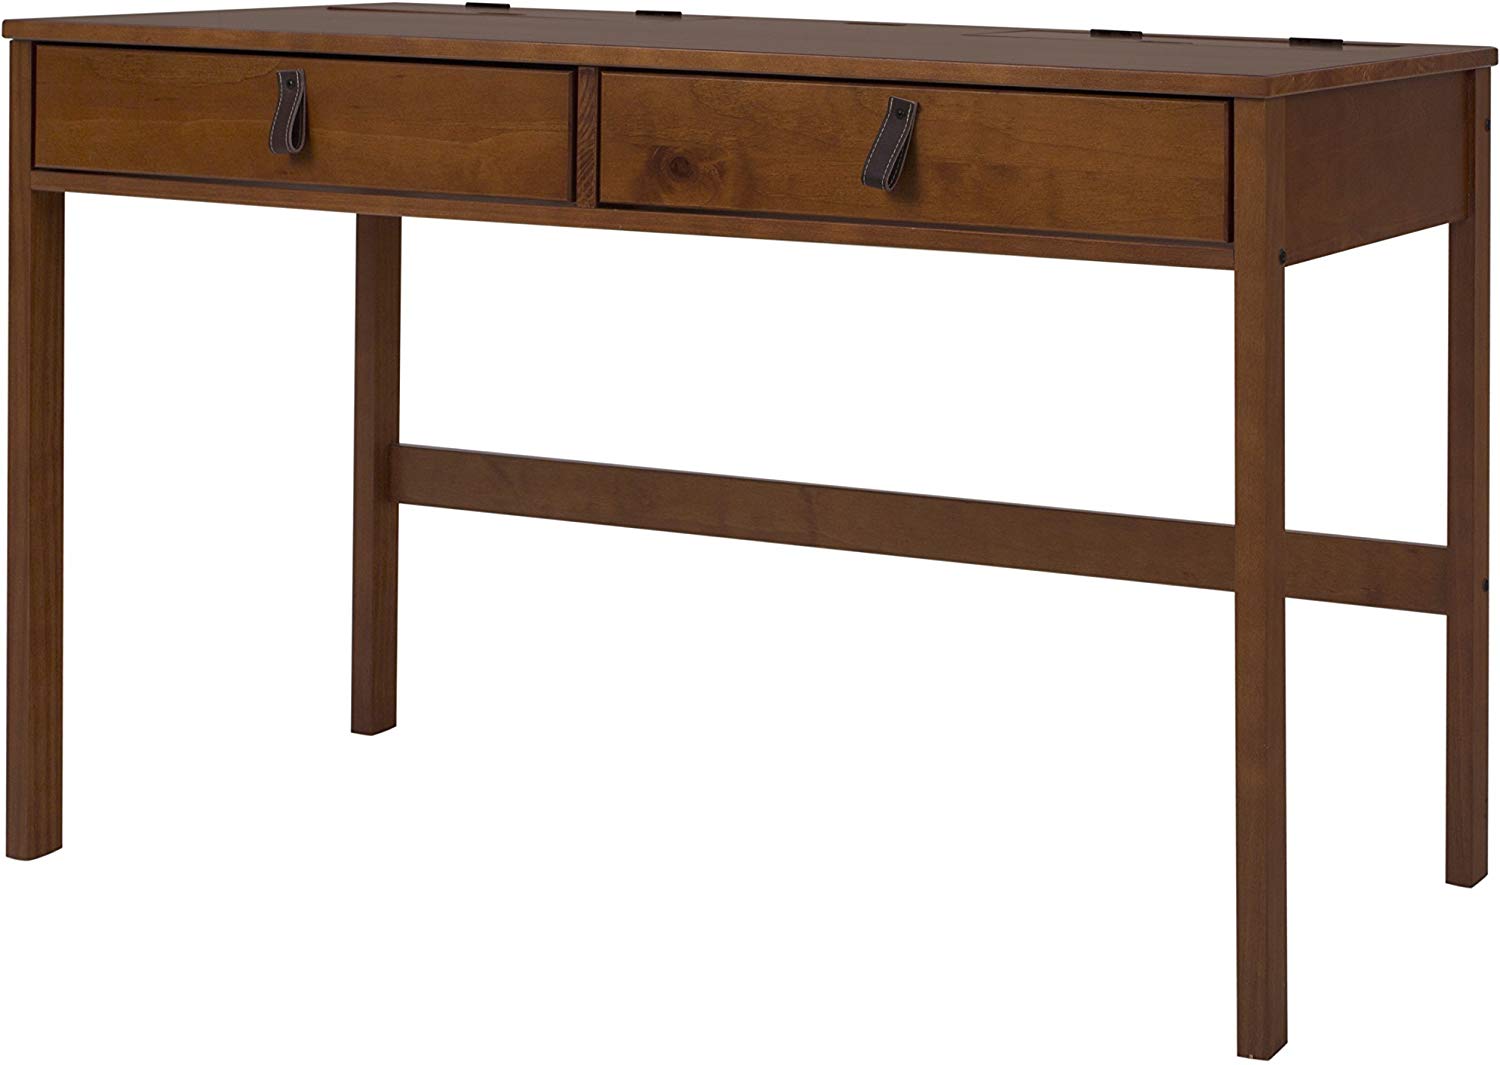 Memomad Bali Home Office Desk with Drawers (Caramel) - memomad.store